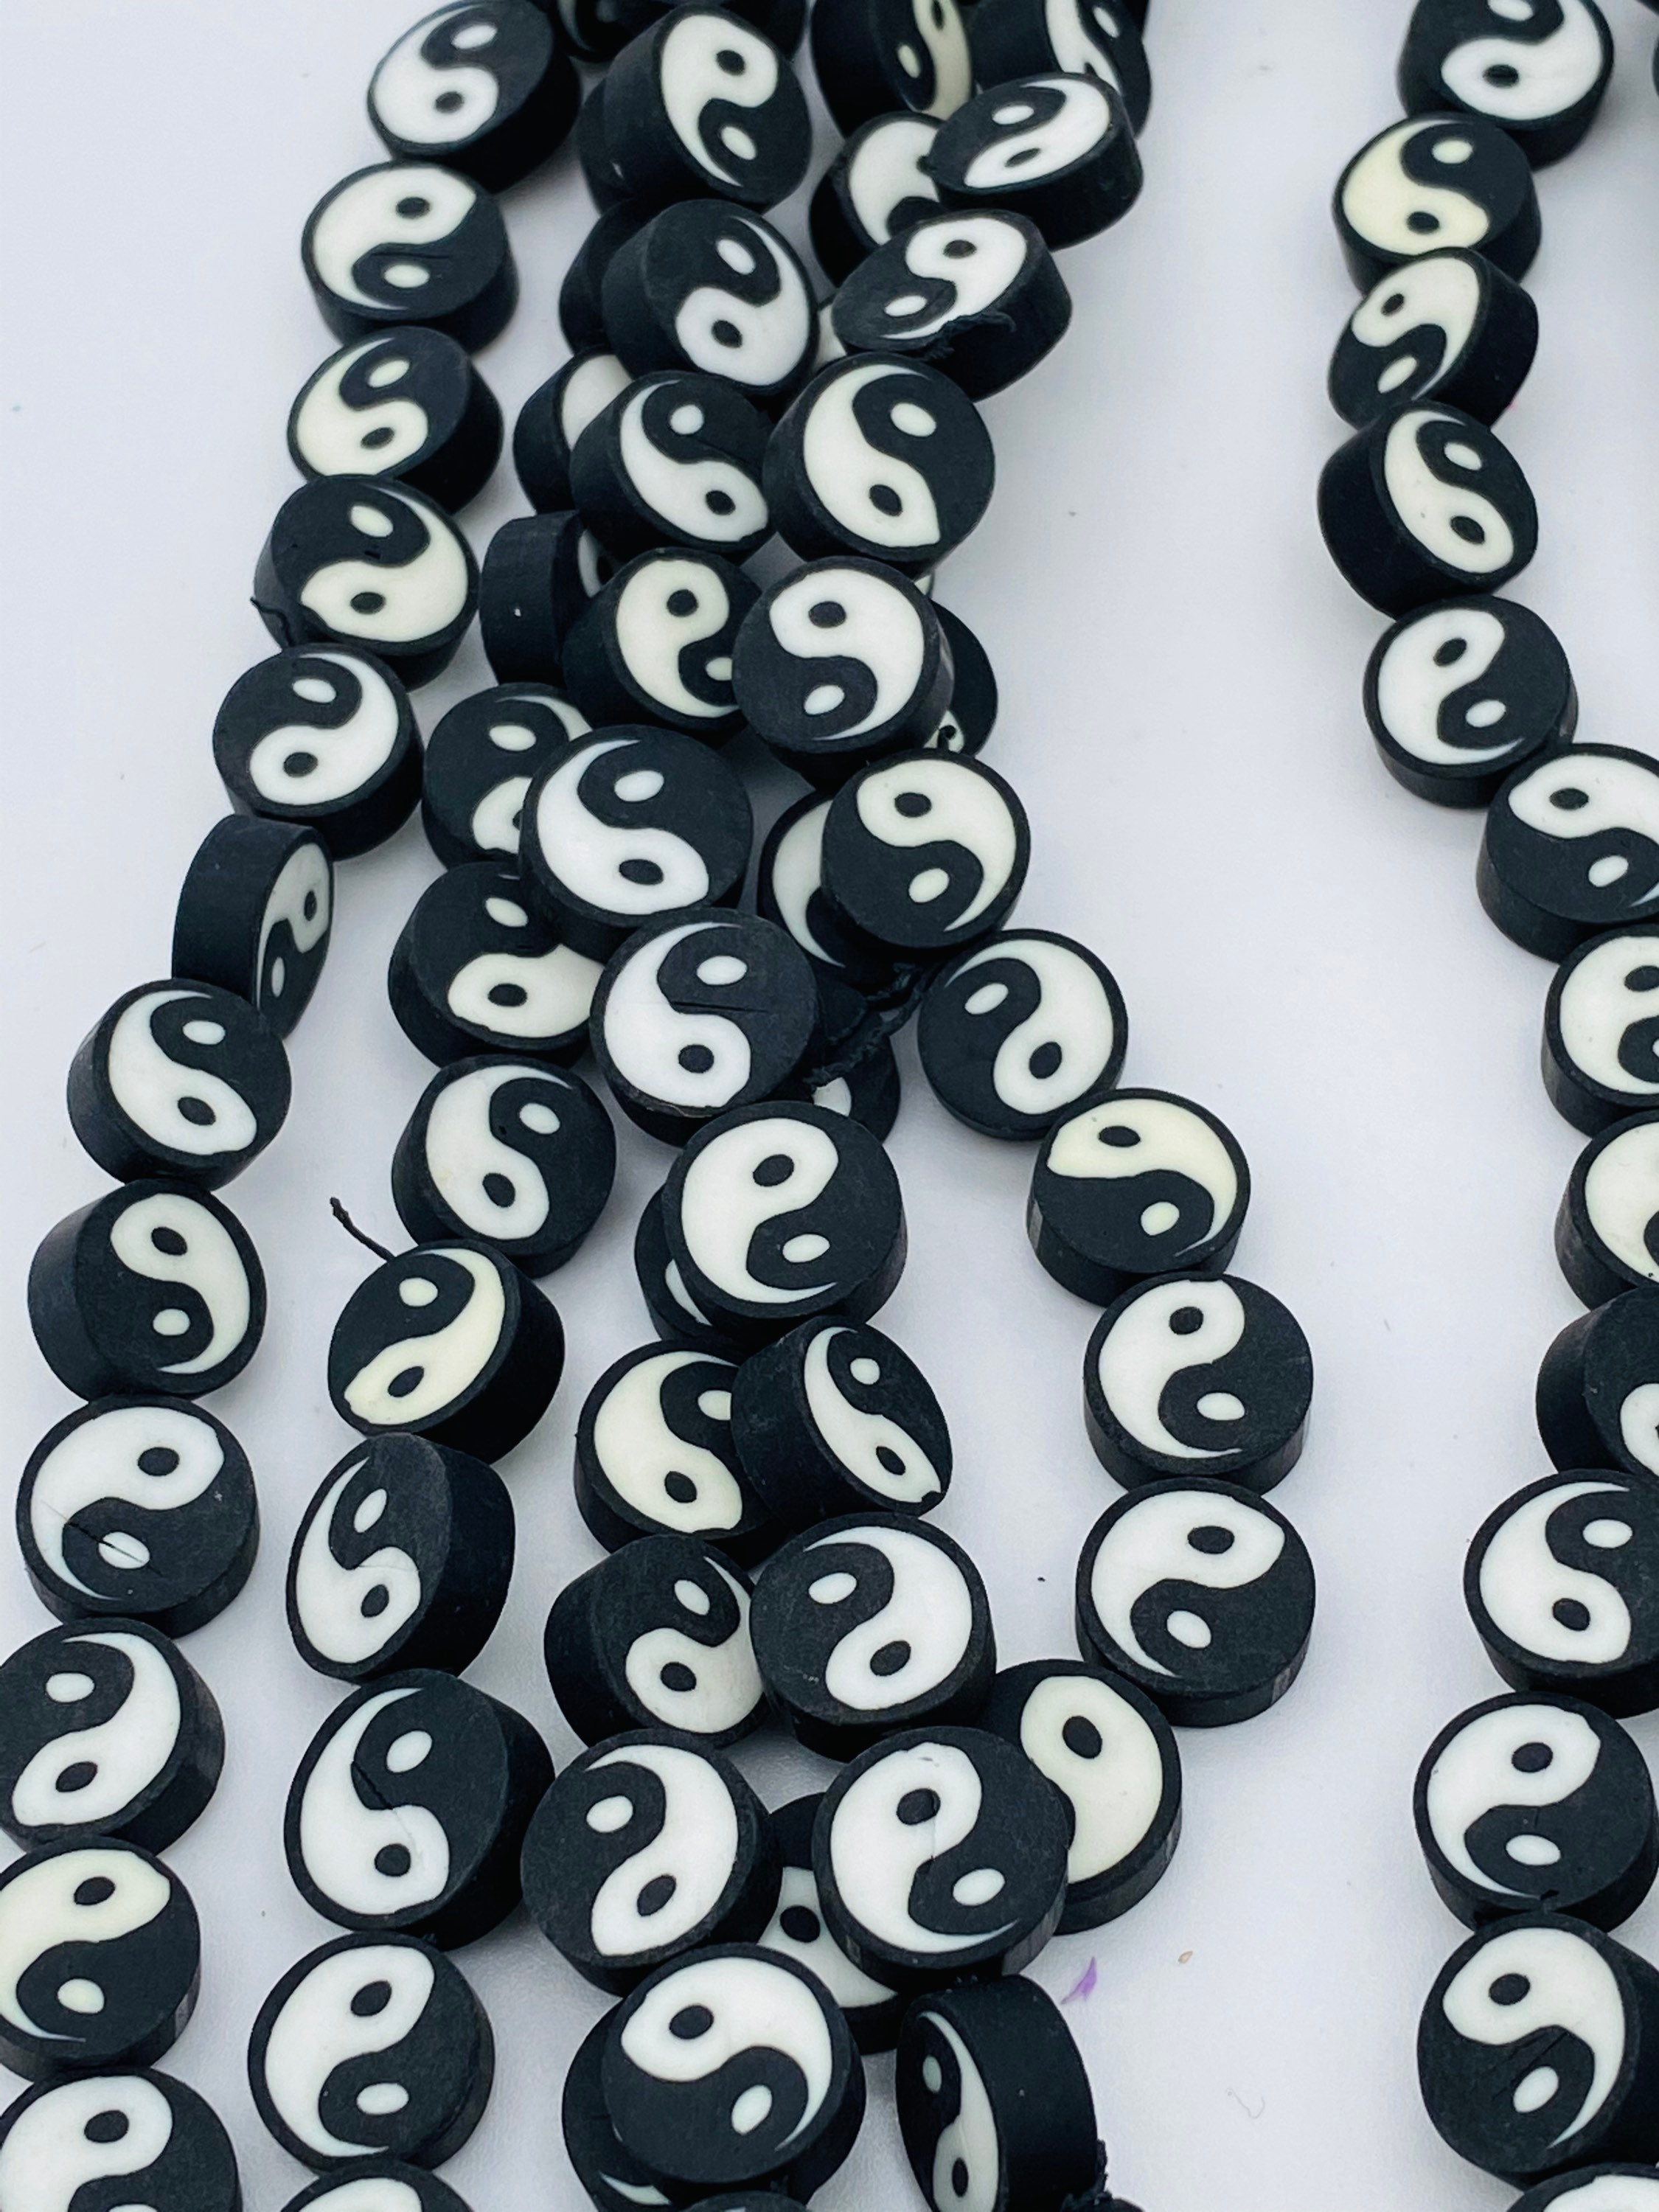 10mm Polymer Clay Beads Yin-yang Beads, Round Beads Jewelry Beads Black and  White Beads Cute Jewelry Beads Approximately 40 Beads per Strand 